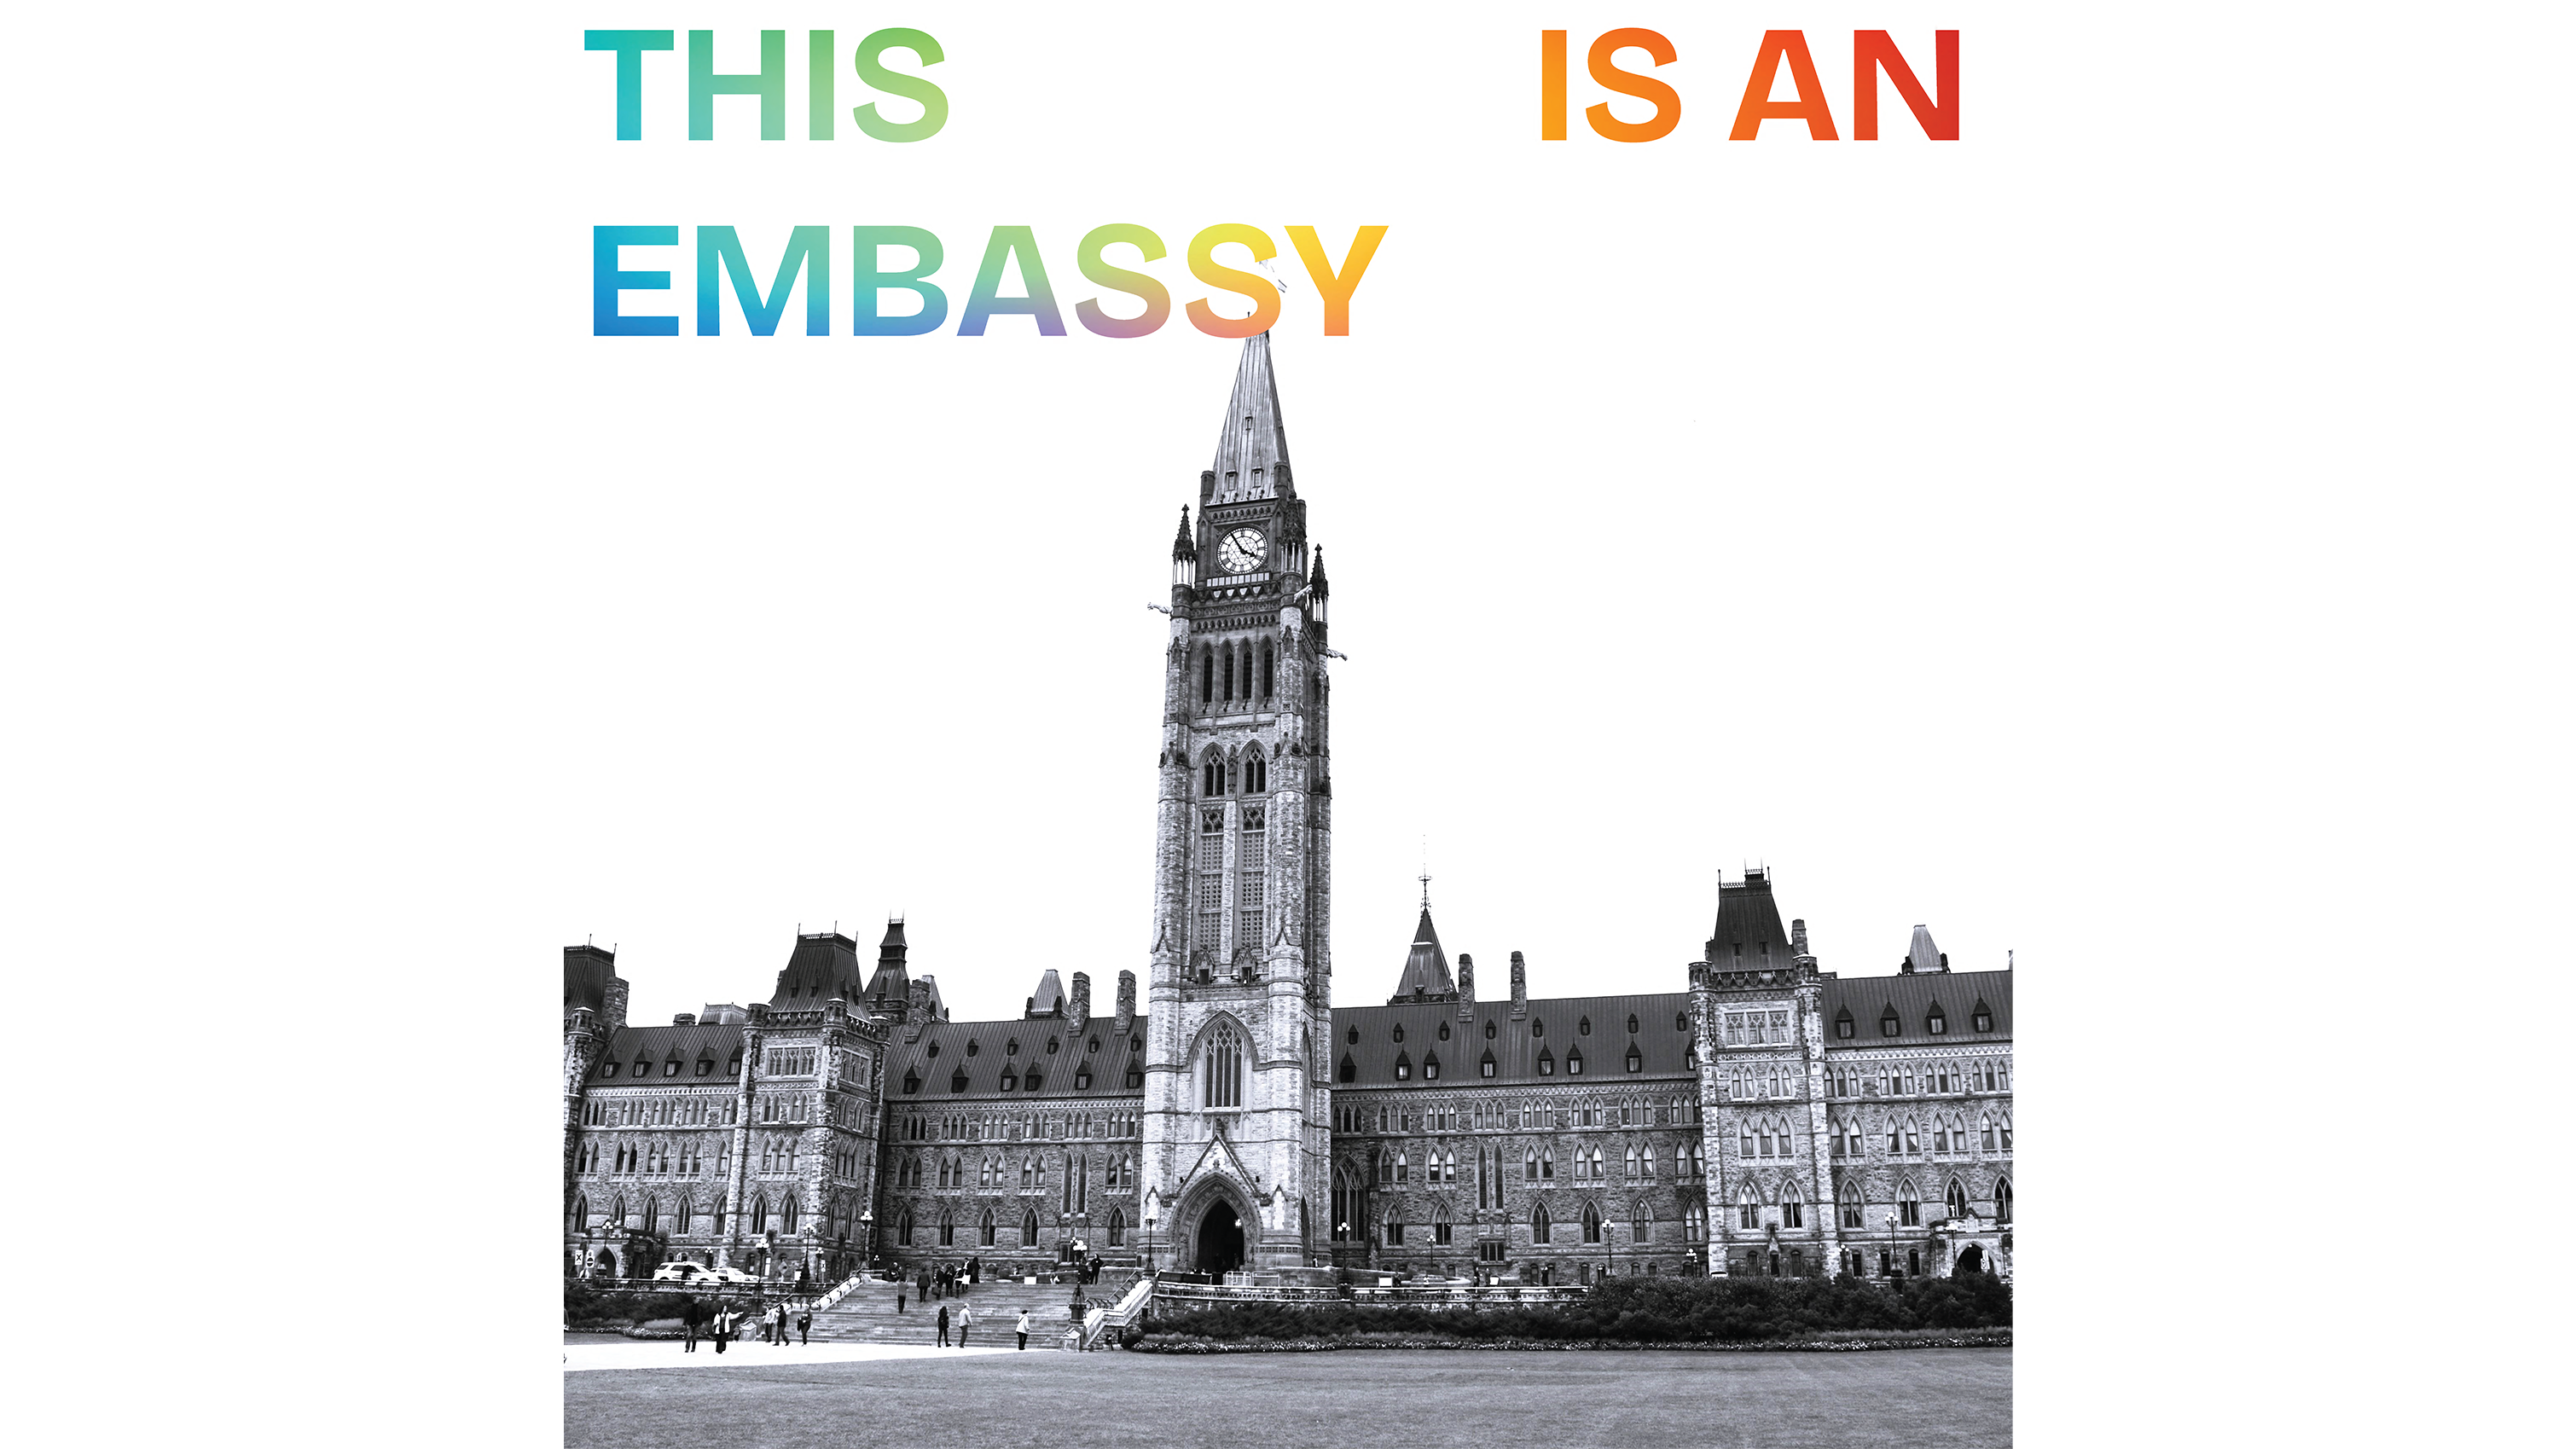 black and white image of the parliament buildings in ottawa with the works this is an embassy in rainbow colour